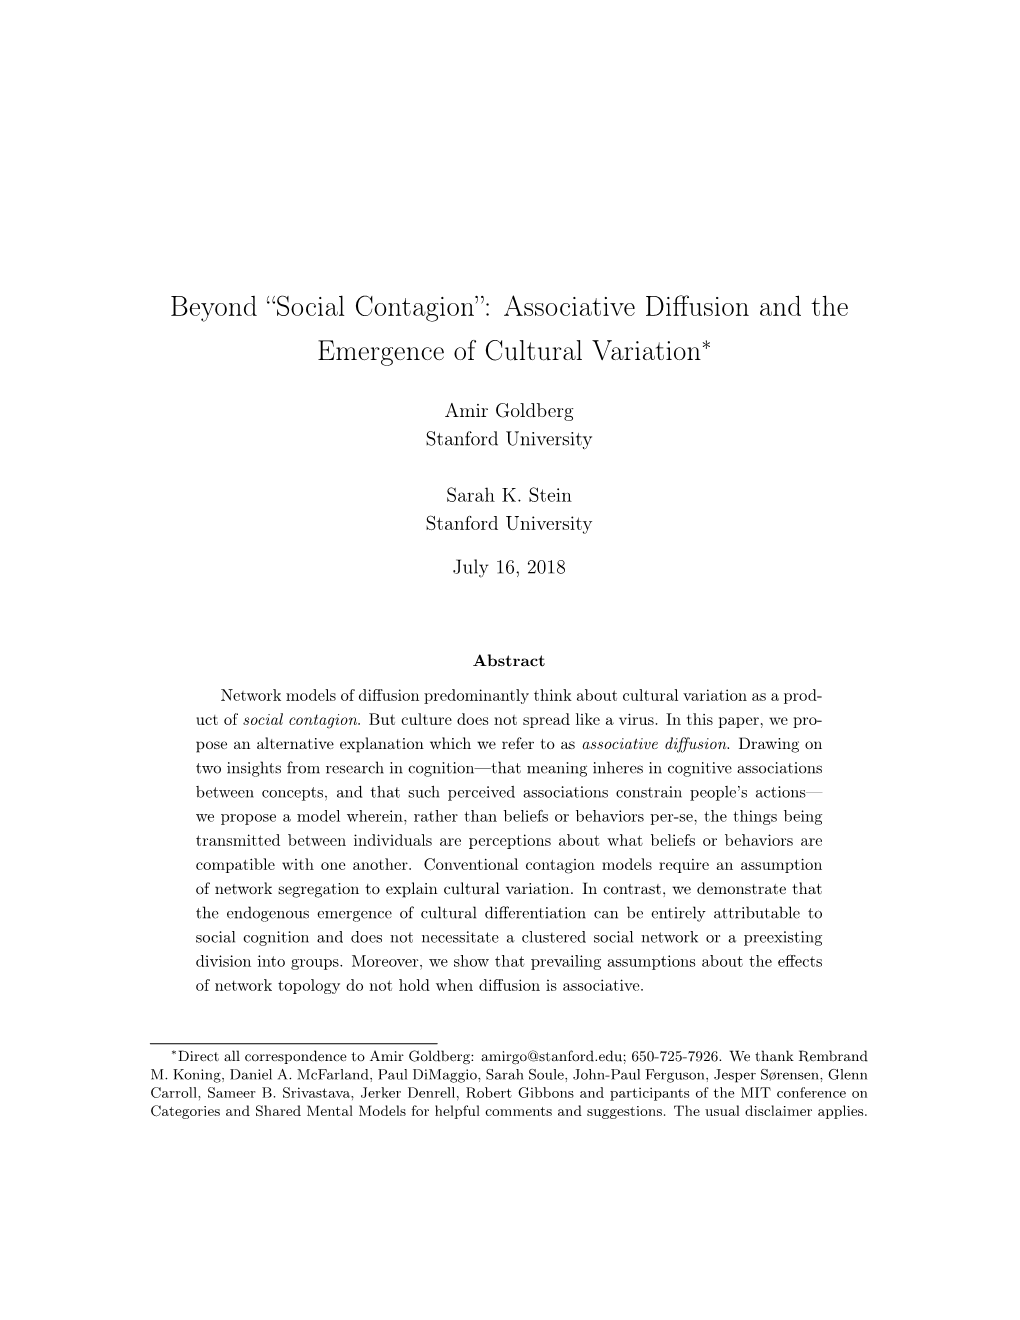 Associative Diffusion and the Emergence of Cultural Variation